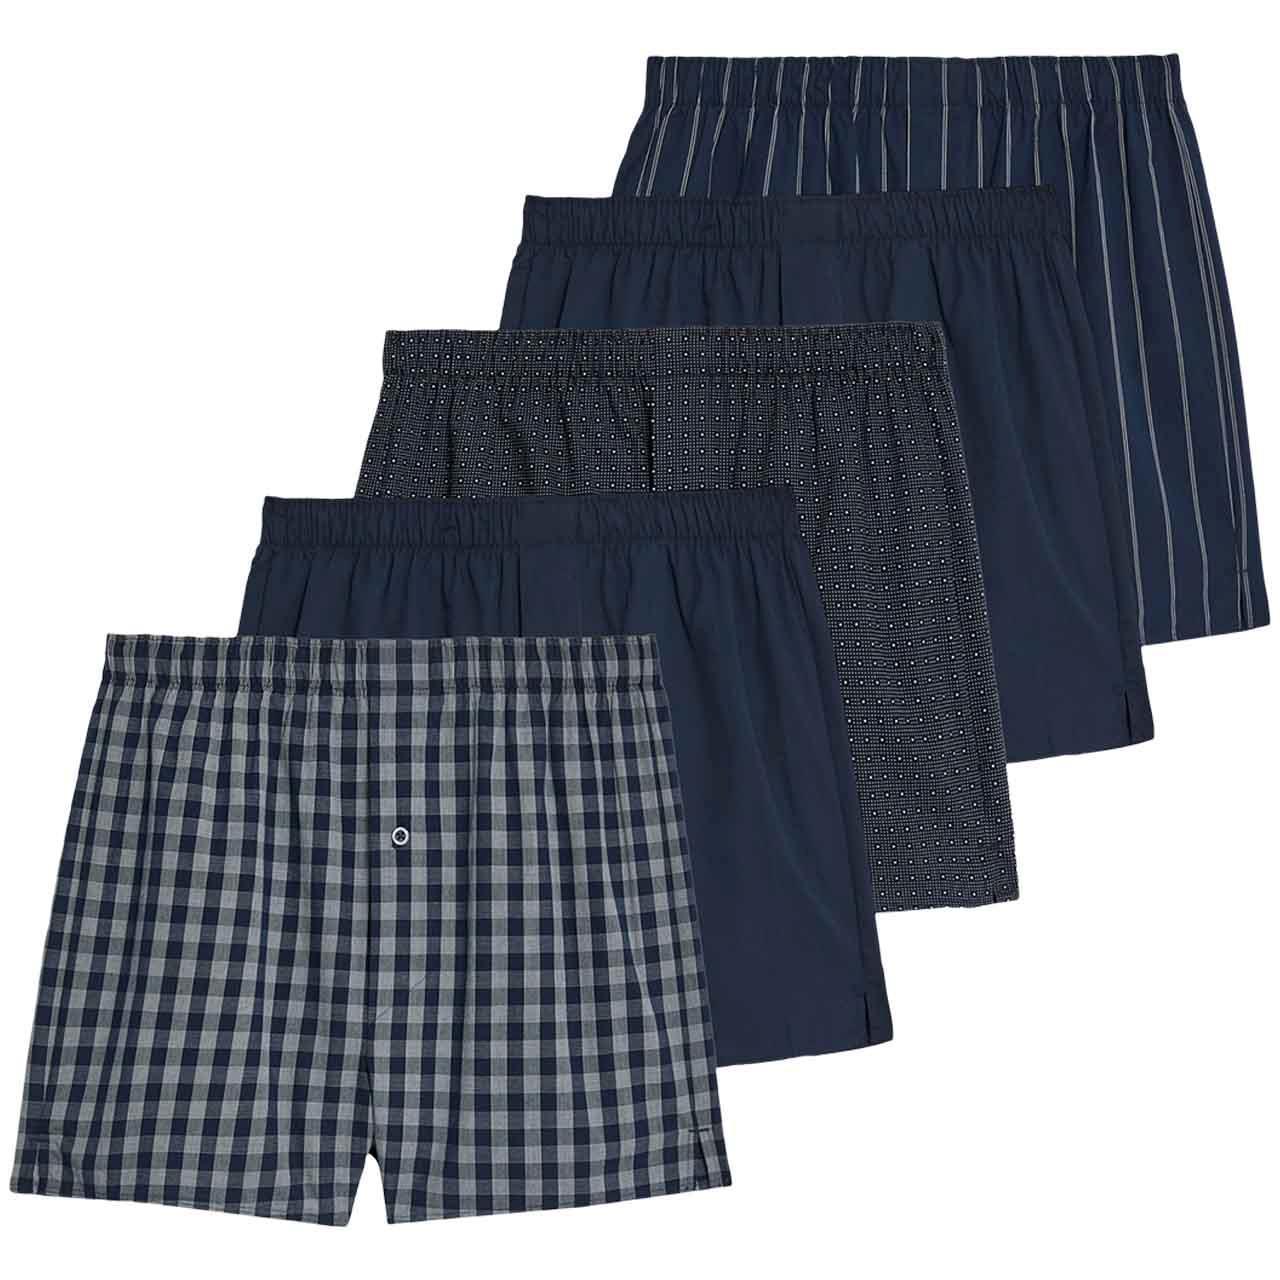 M&S Mens, Pure Cotton Assorted Woven Boxers, M, Dark Navy, 5pk